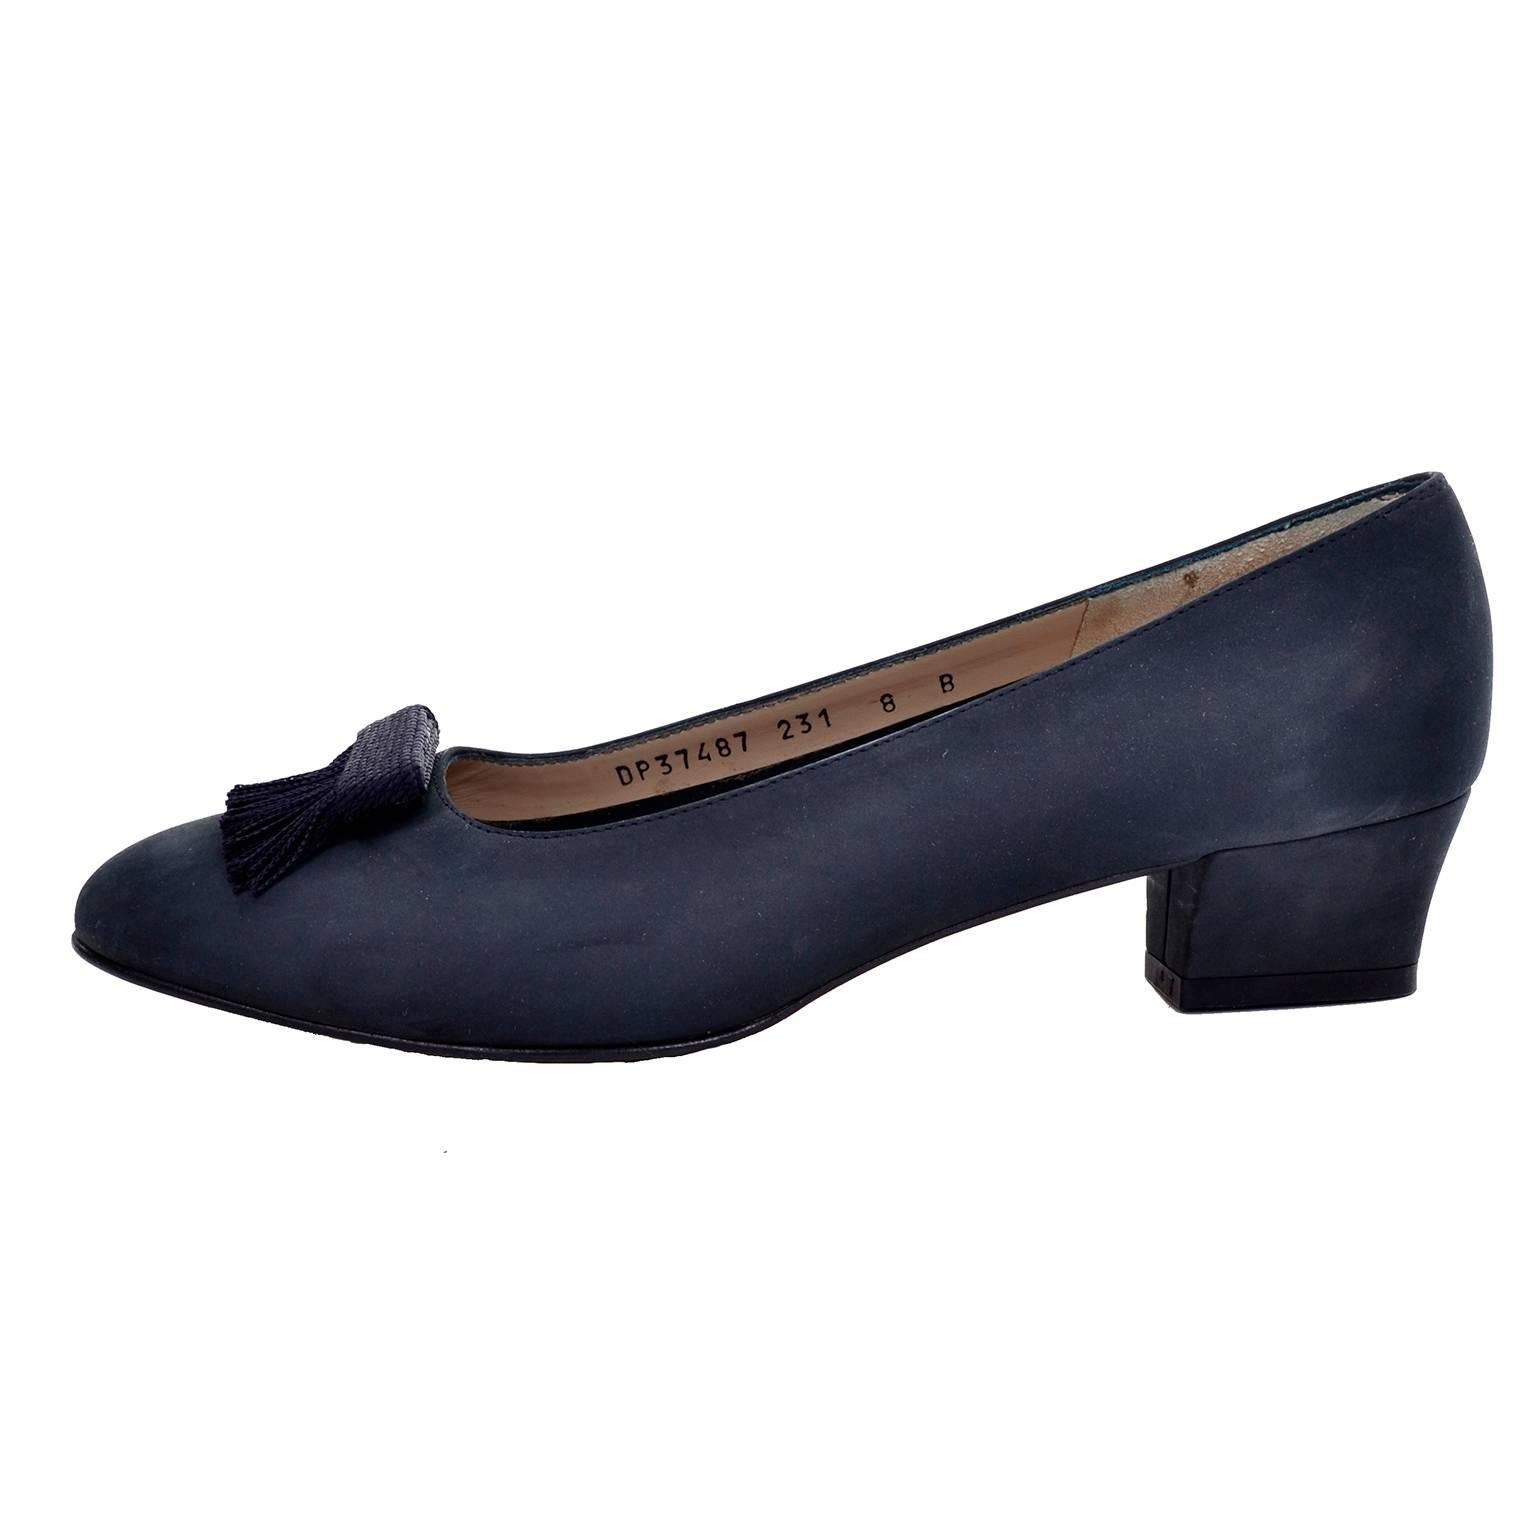 Women's New Vintage Ferragamo Shoes in Navy Blue Suede with Fringed Tassels Size 8B